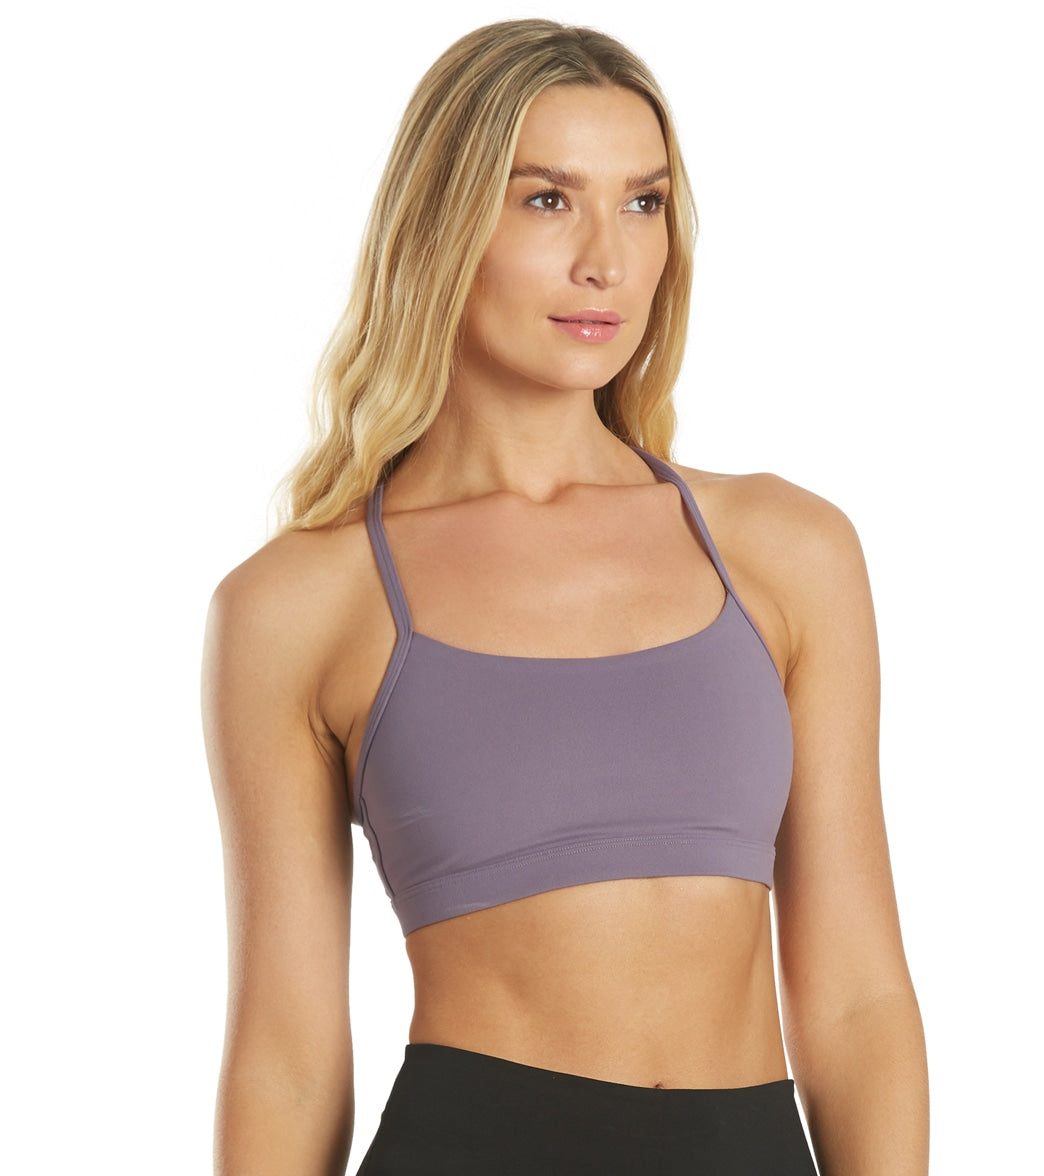 Everyday Yoga Delight Tribe Racer Back Sports Bra at YogaOutlet